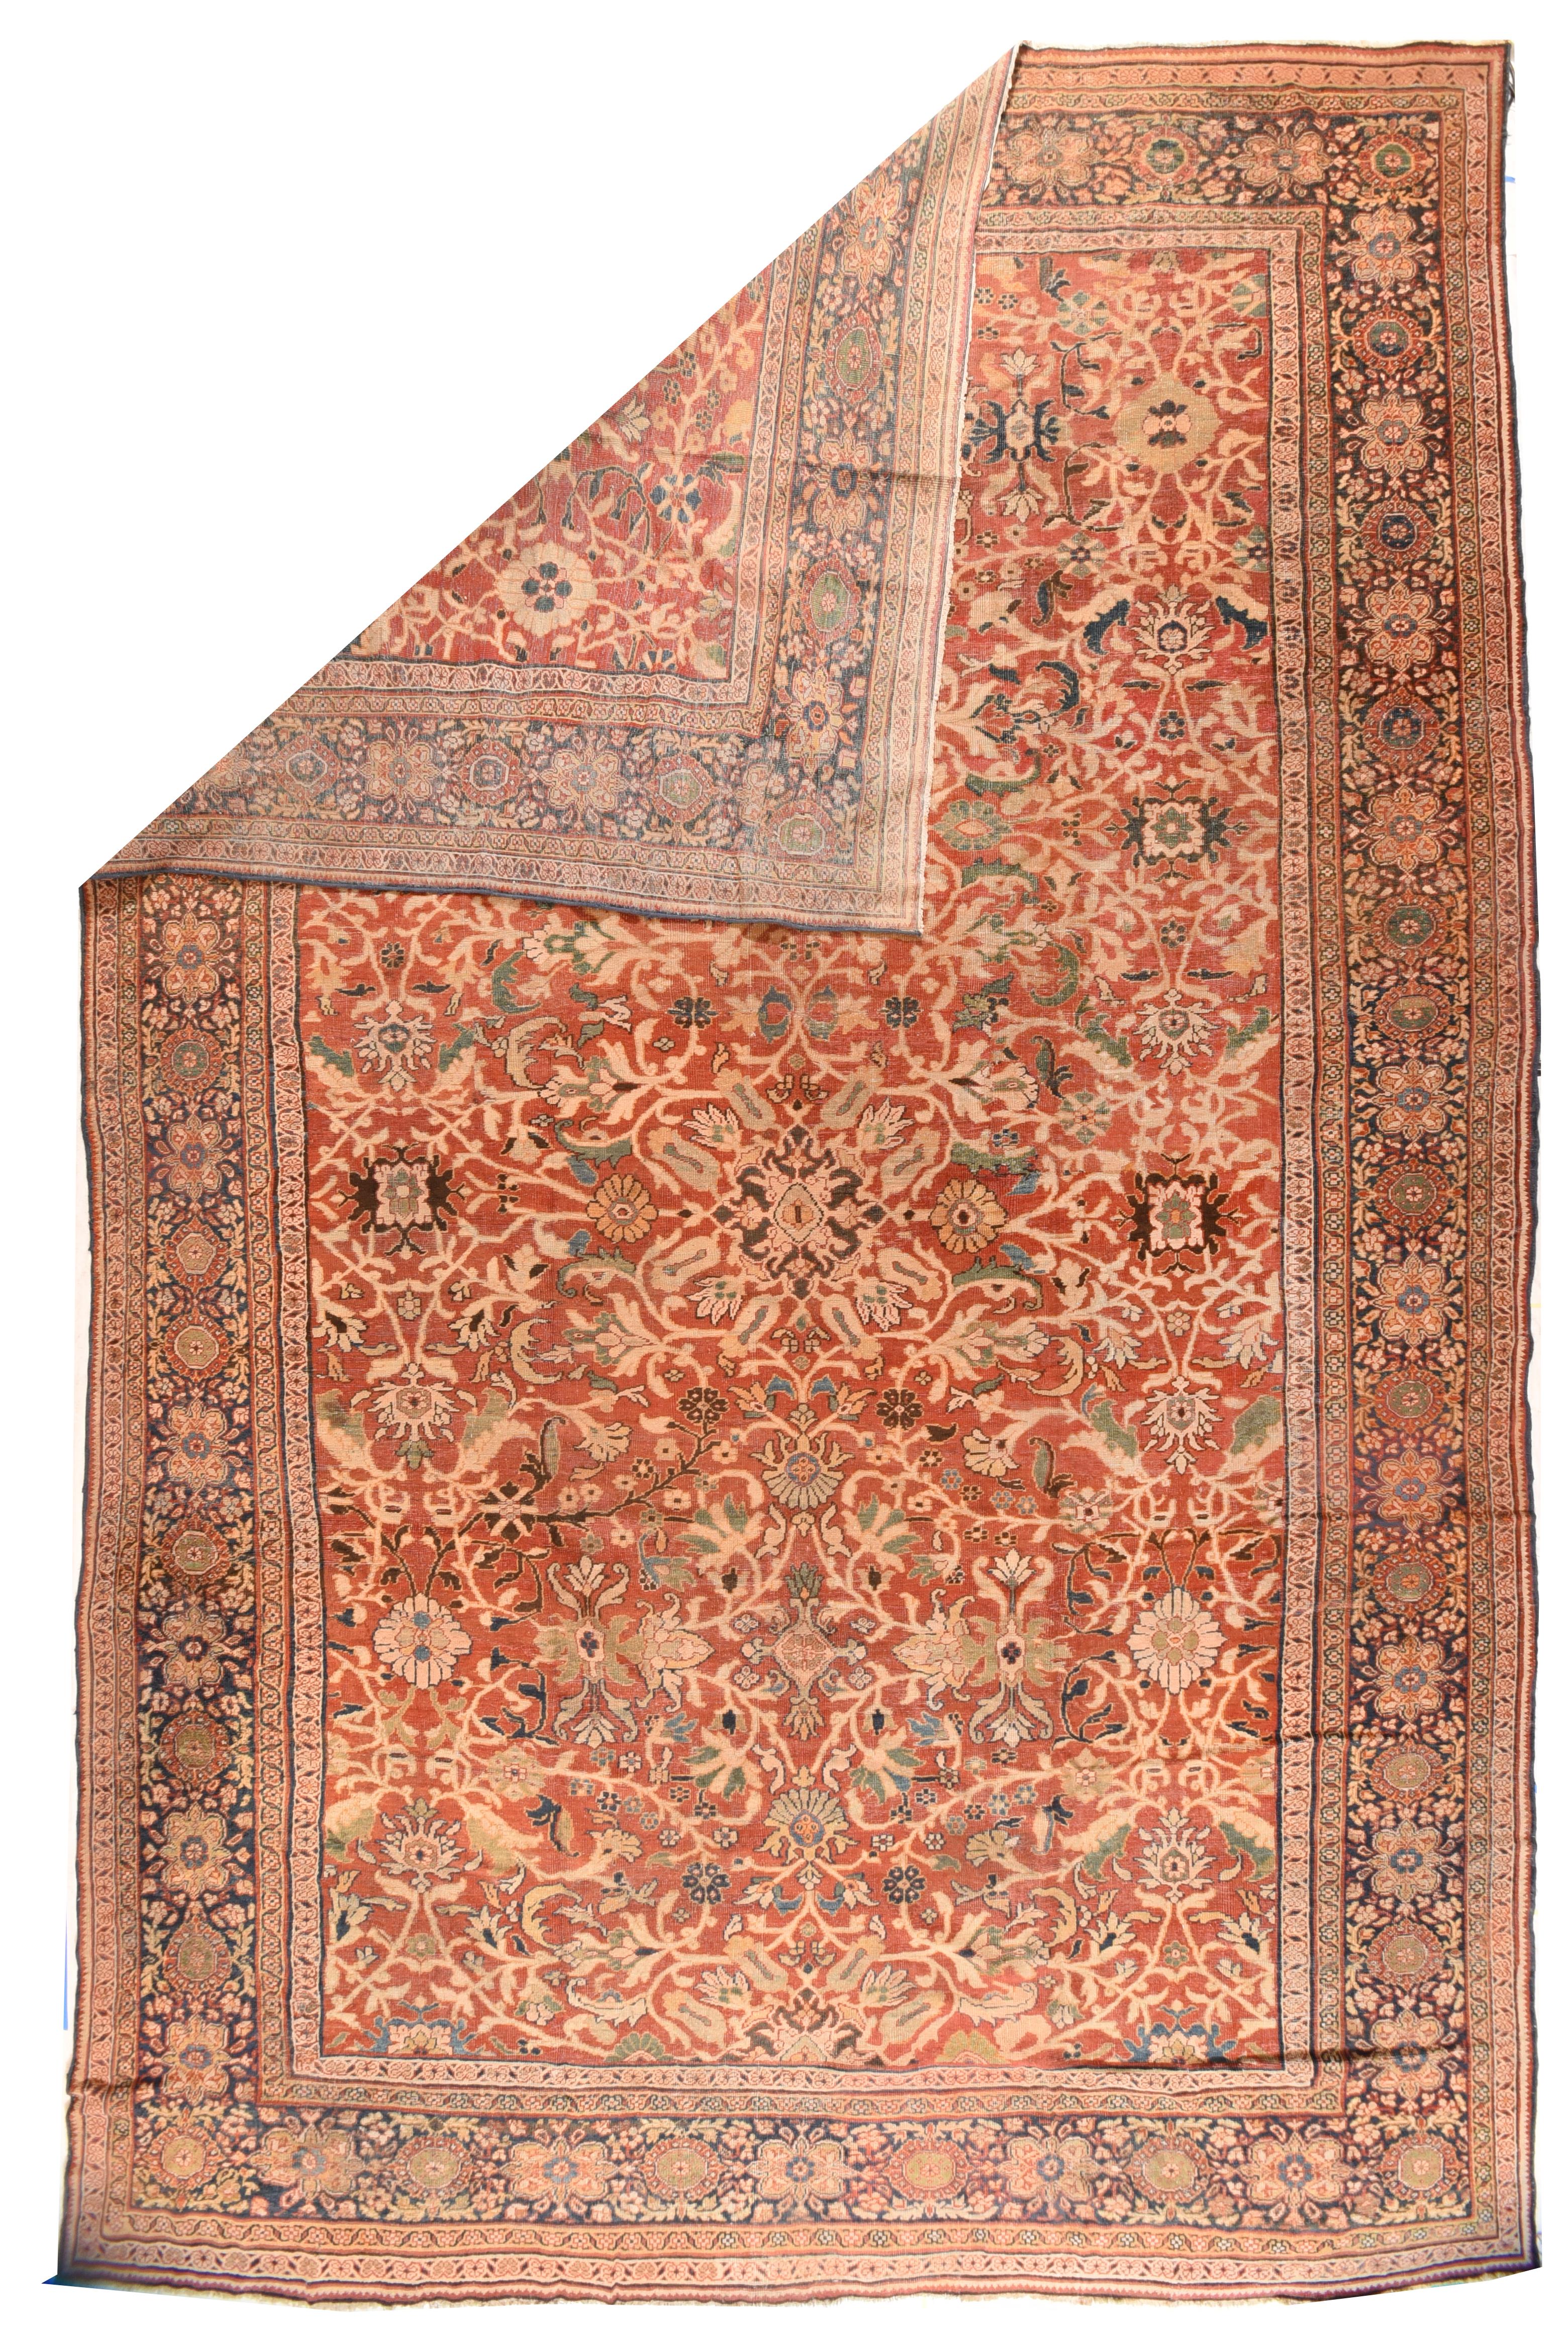 Tapis antique Mahal Soultanabad 12'7'' x 19'8''.